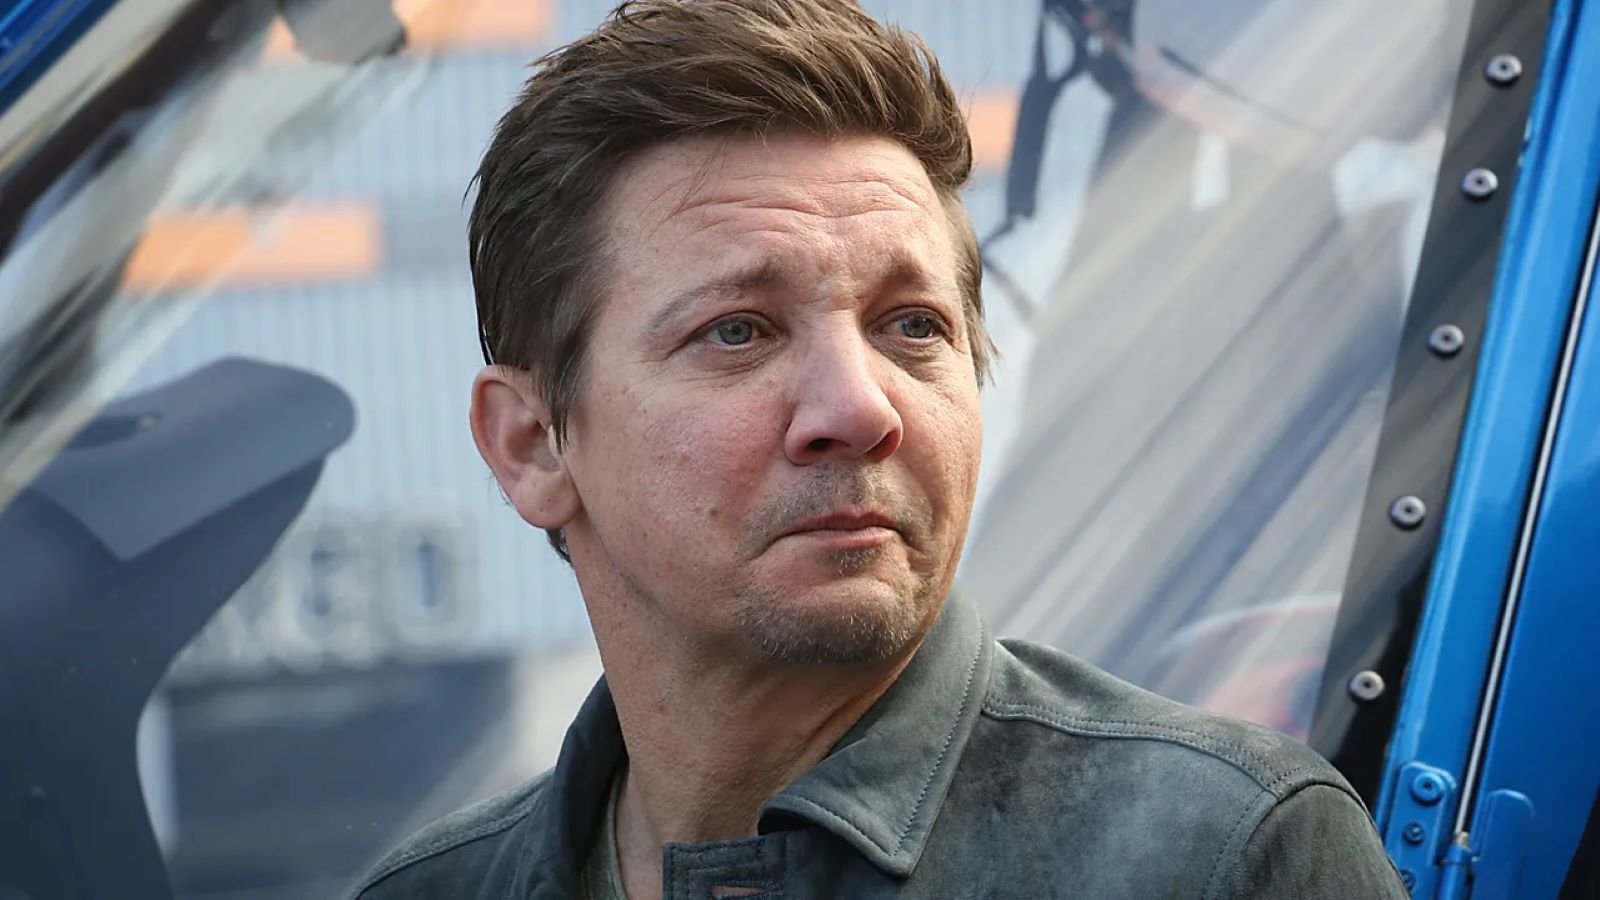 Jeremy Renner breaks his silence about his future in the MCU five months after the crash